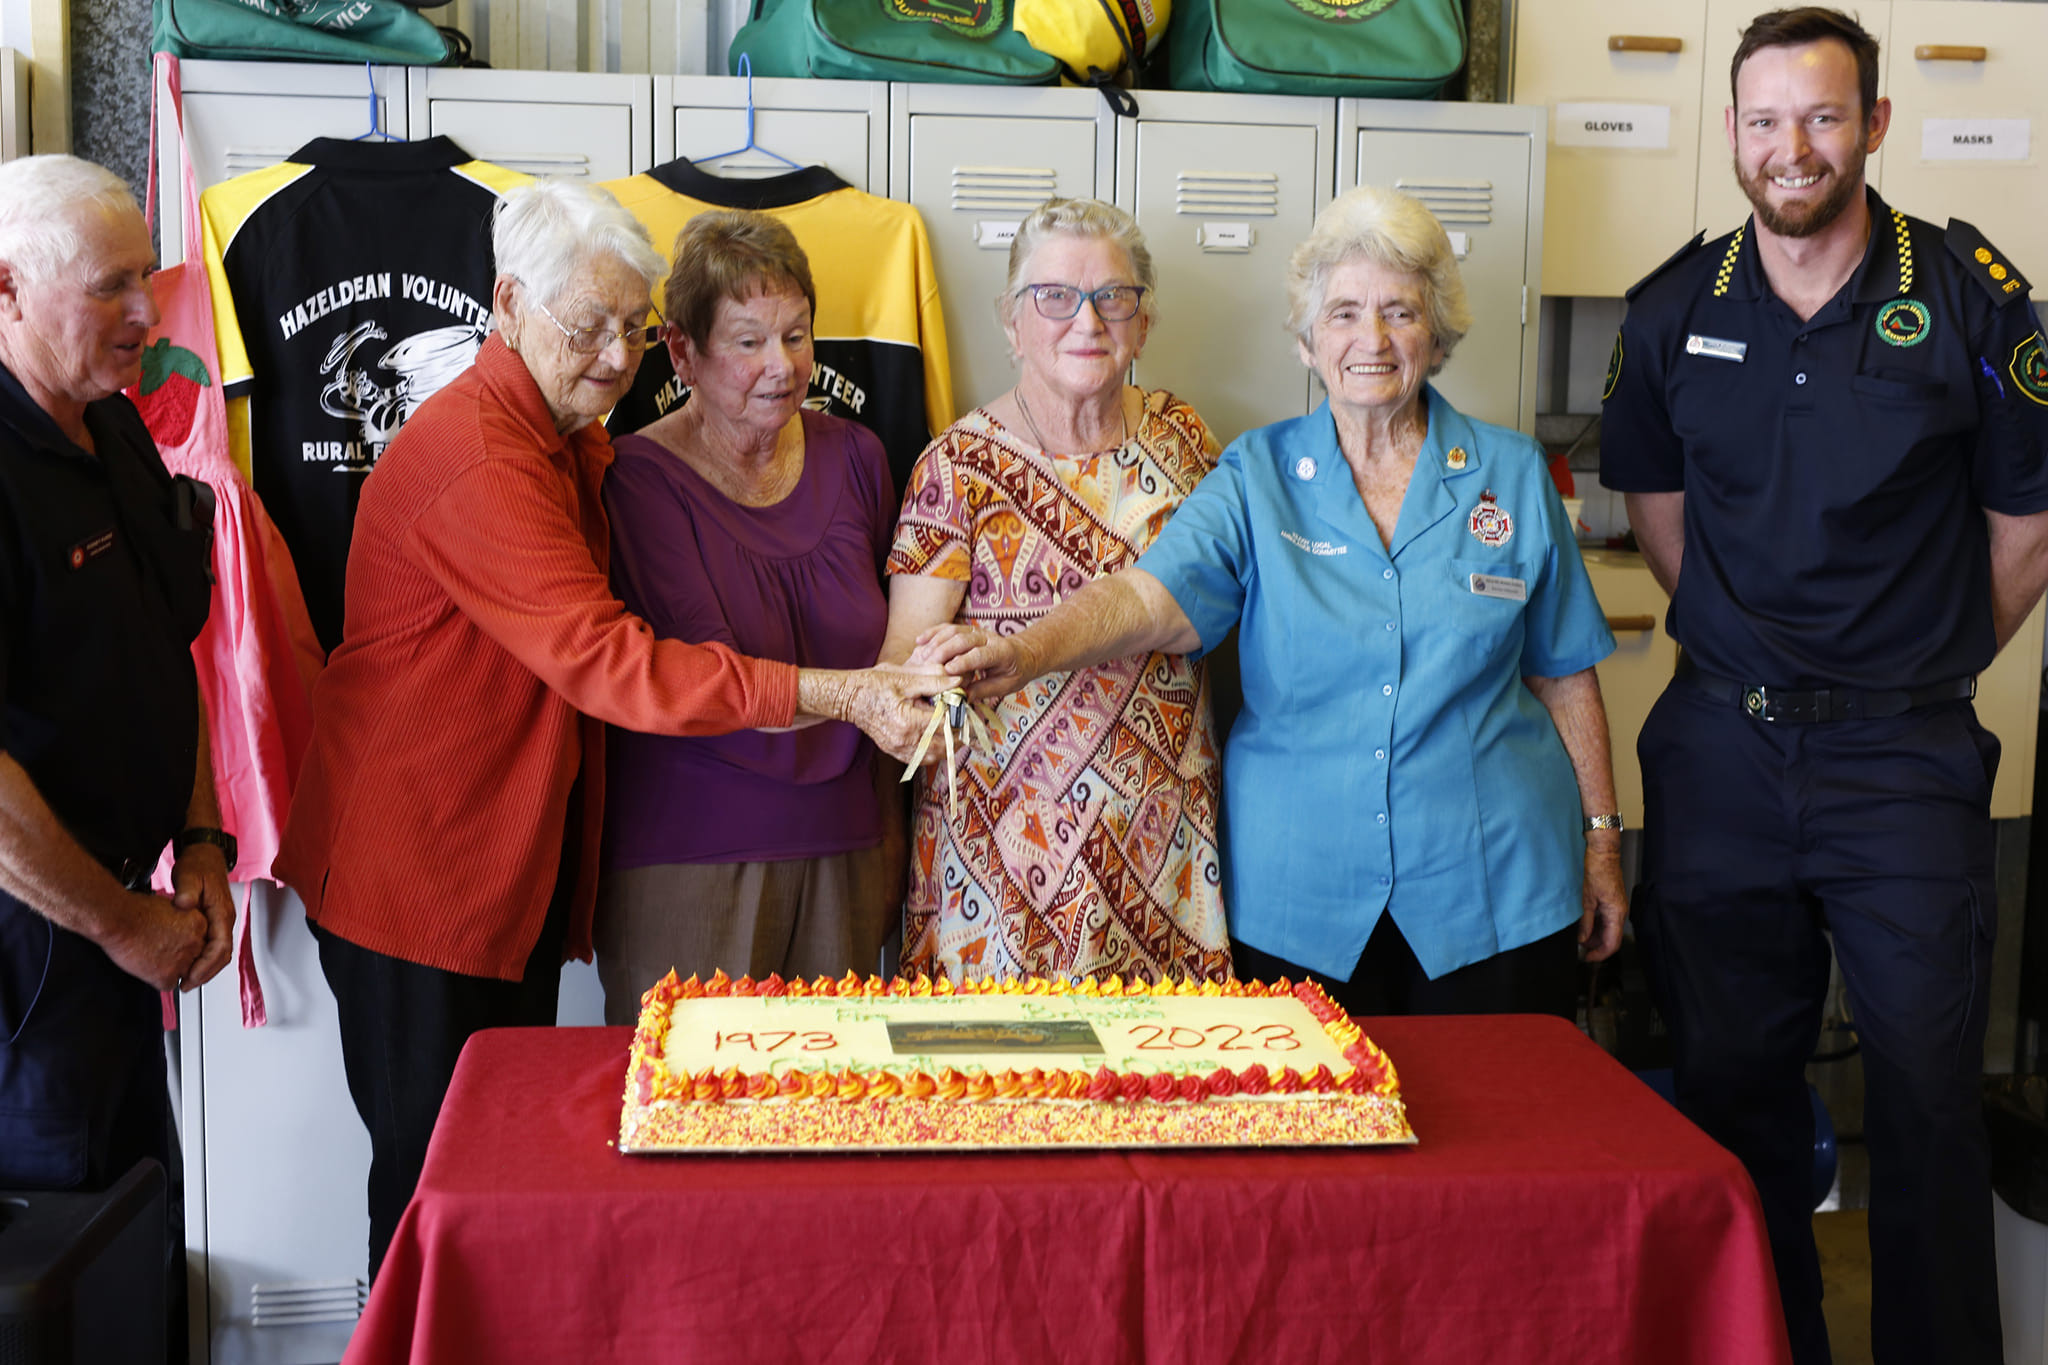 Firefighter widows Grace Carseldine, Lesley Scott, Desley Cobbin and Zandra Hollworth cut the cake, accompanied by Rodney Kunde (far left) and Jack Burford (far right).